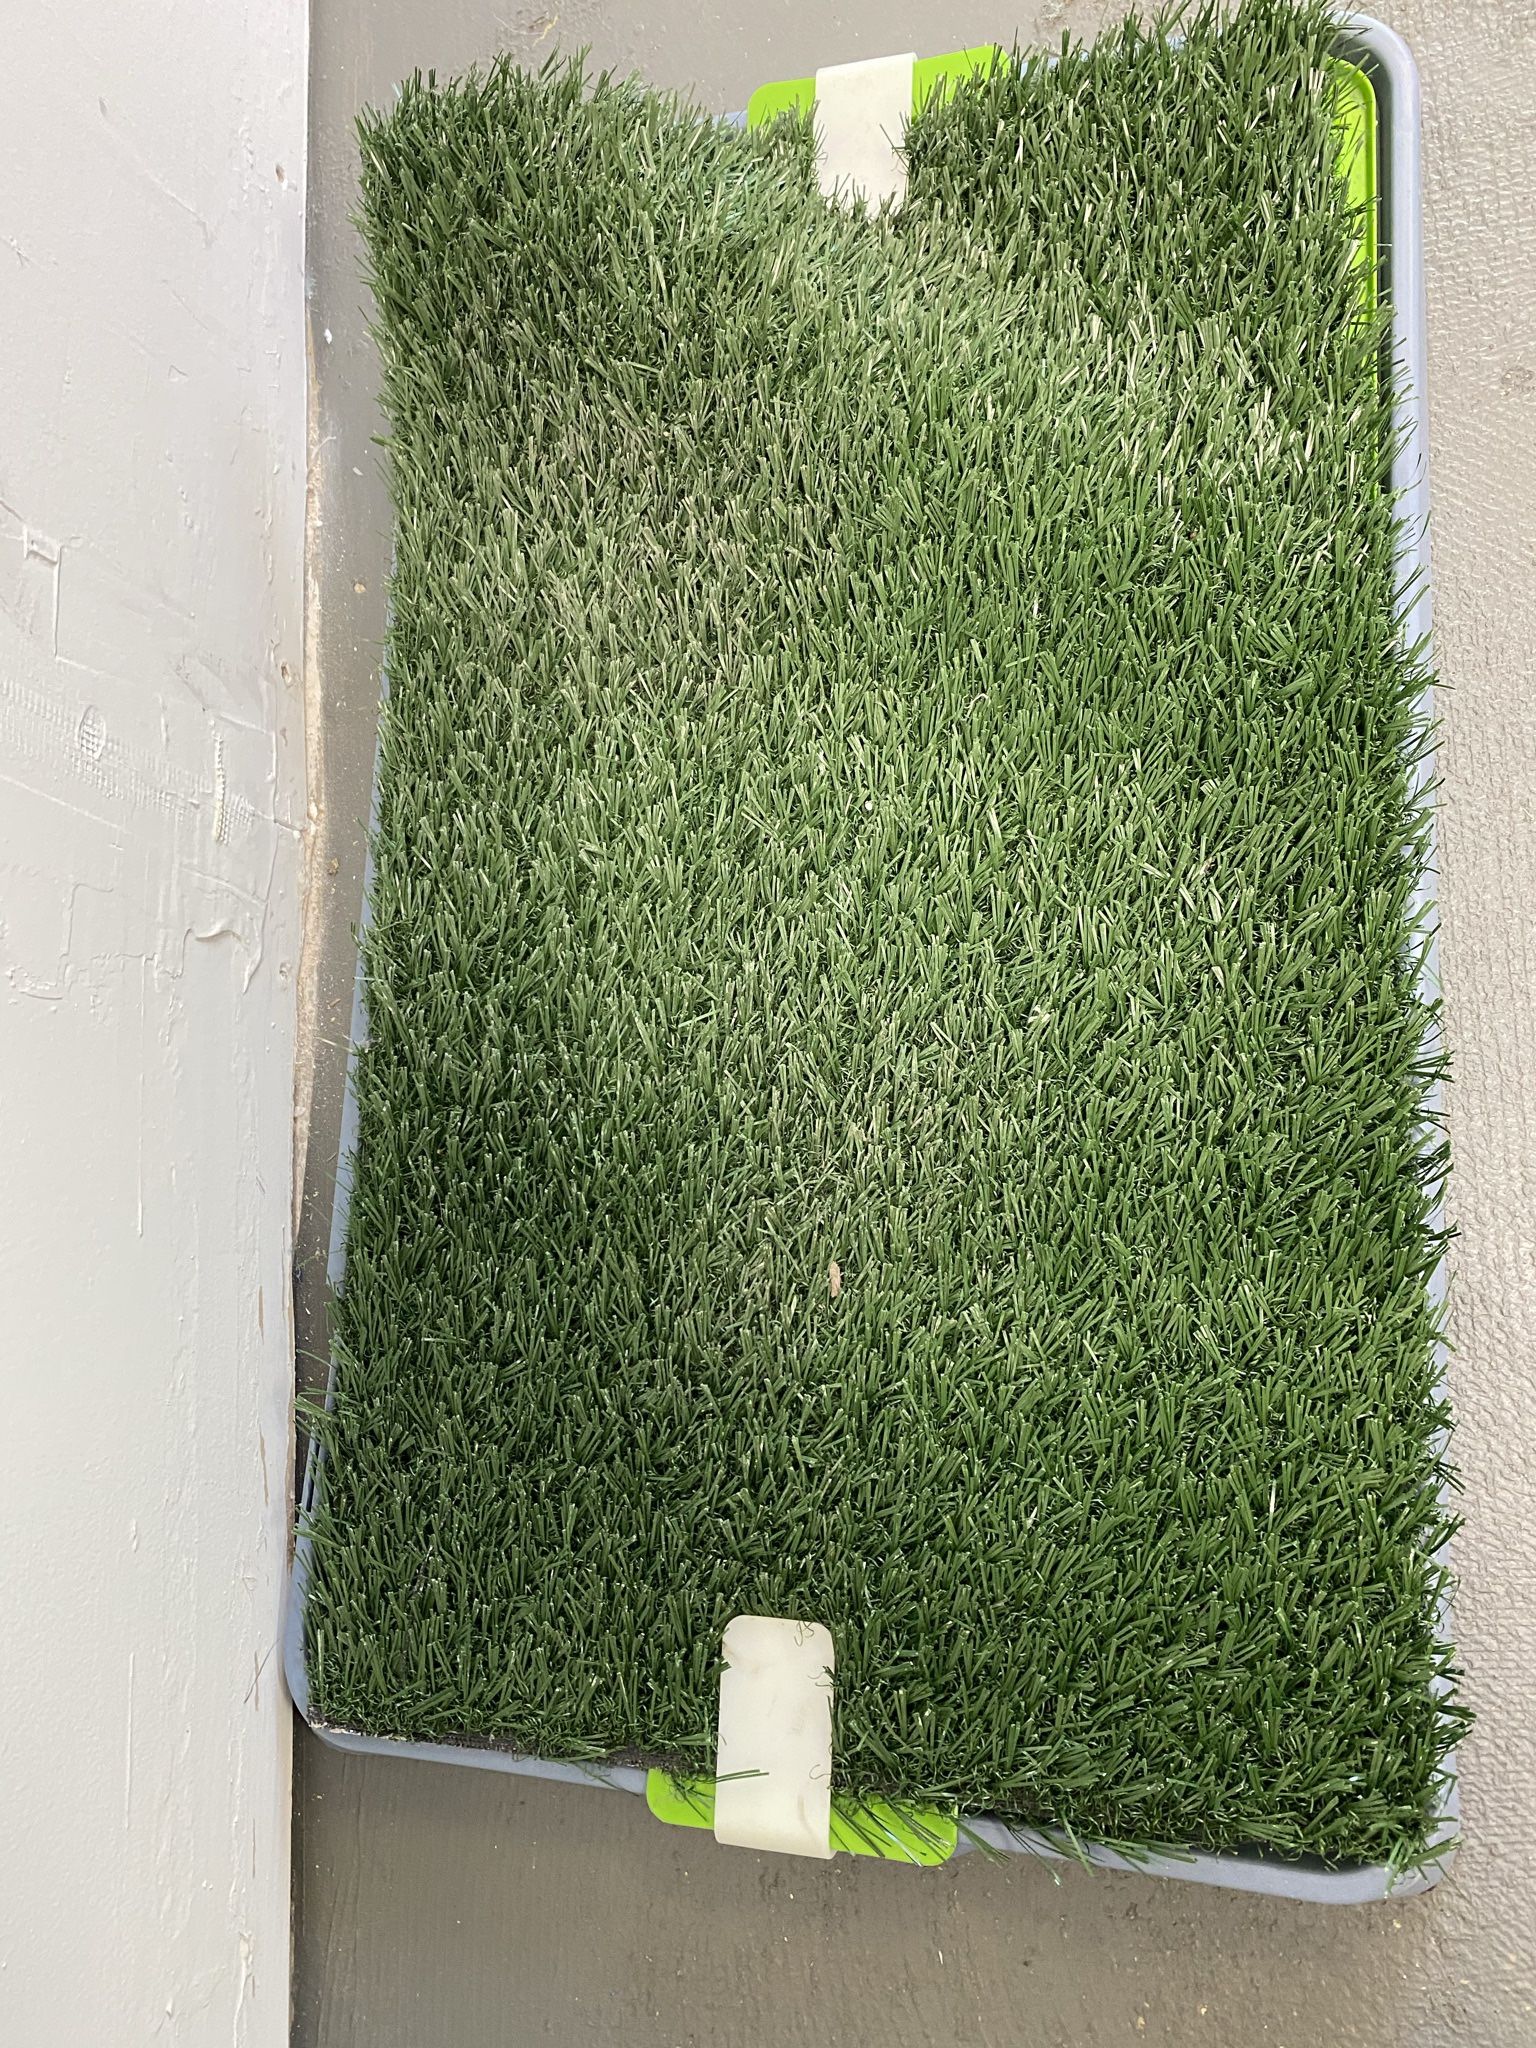 Puppy potty trainer grass mat and tray